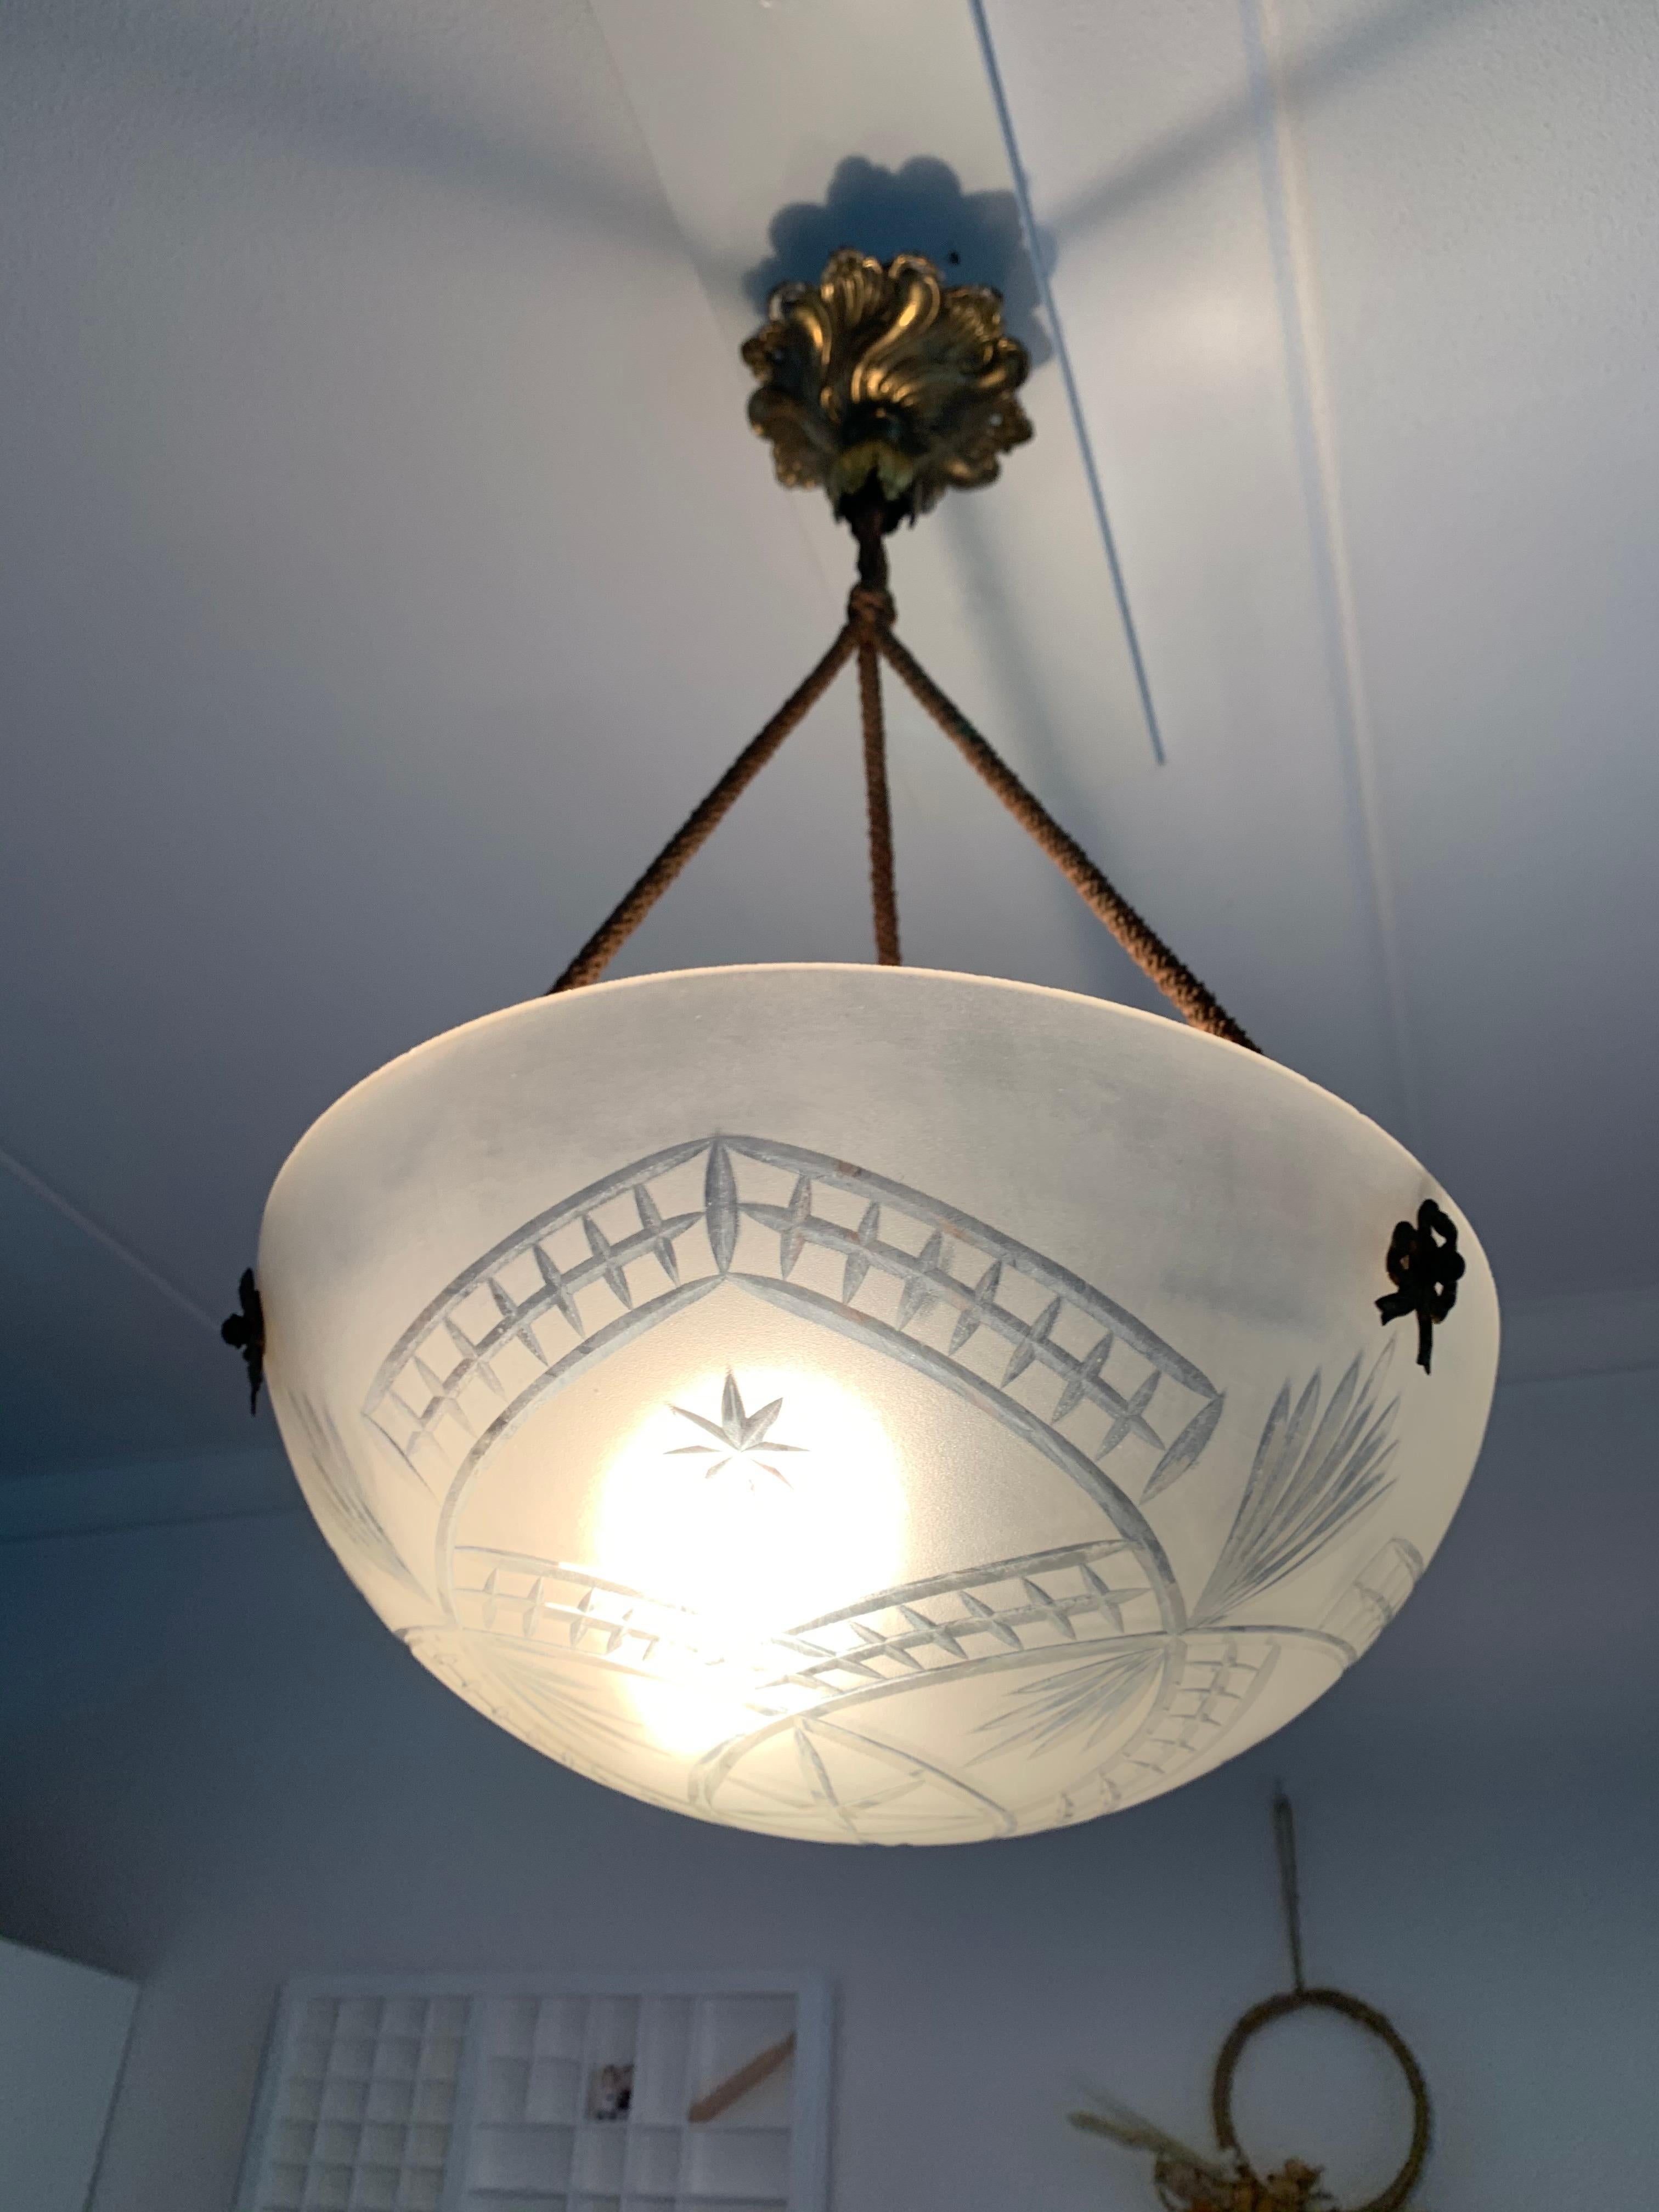 Beautiful early 1900s French fixture, still hanging from its original rope.

The wonderful design of the hand engraved motifs in the sizable glass shade make this antique light look like a cut diamond hanging from your ceiling. Both with the light